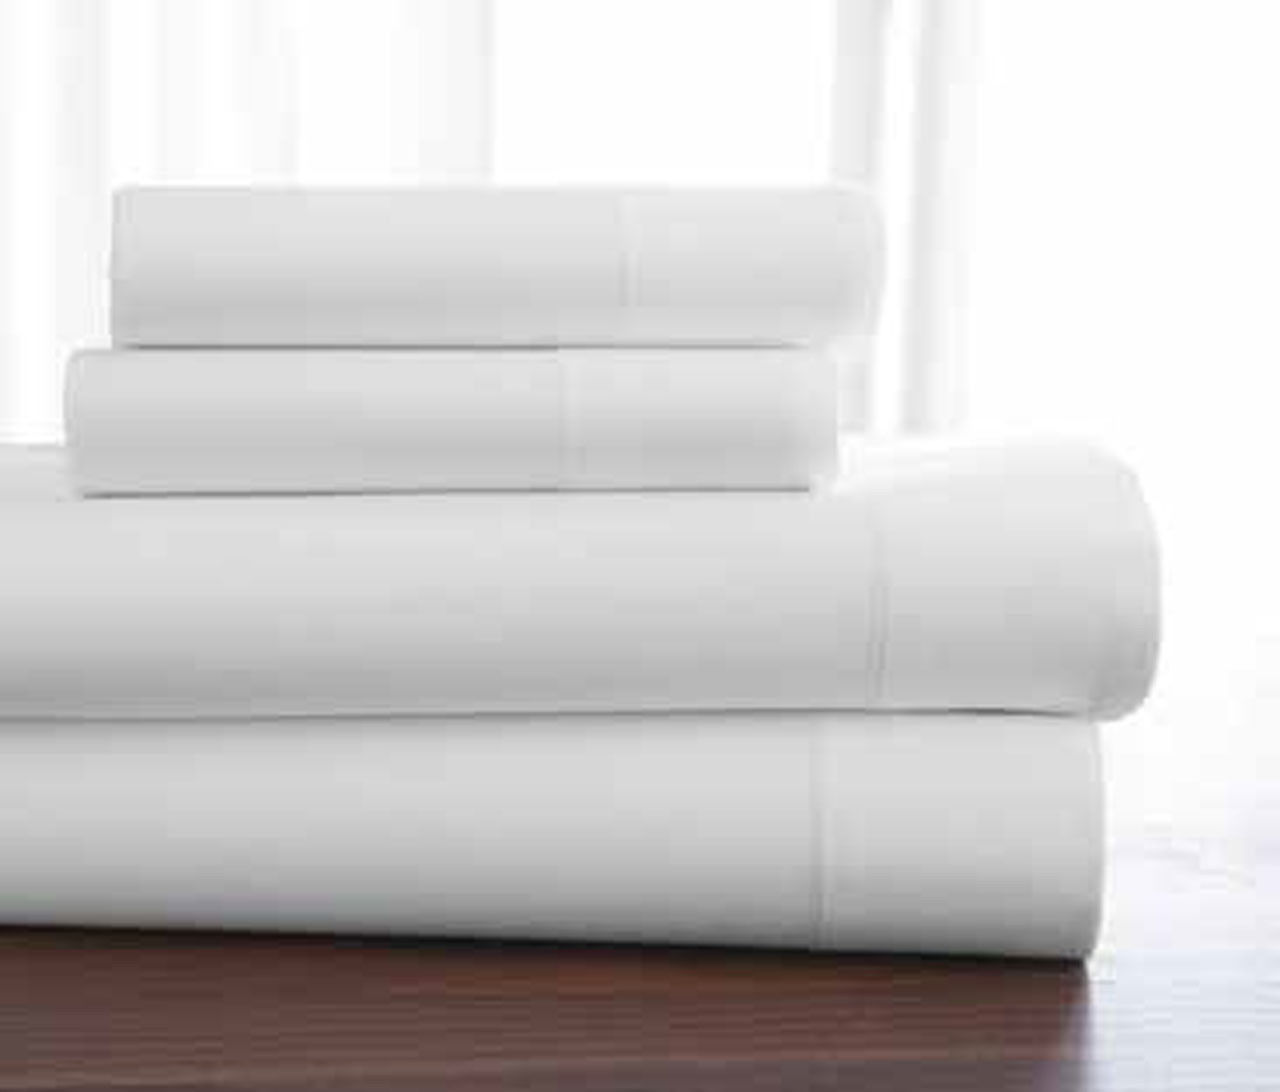 What is the purpose of the color-coded bot in the Welspun T-400 hygrocotton sheets?